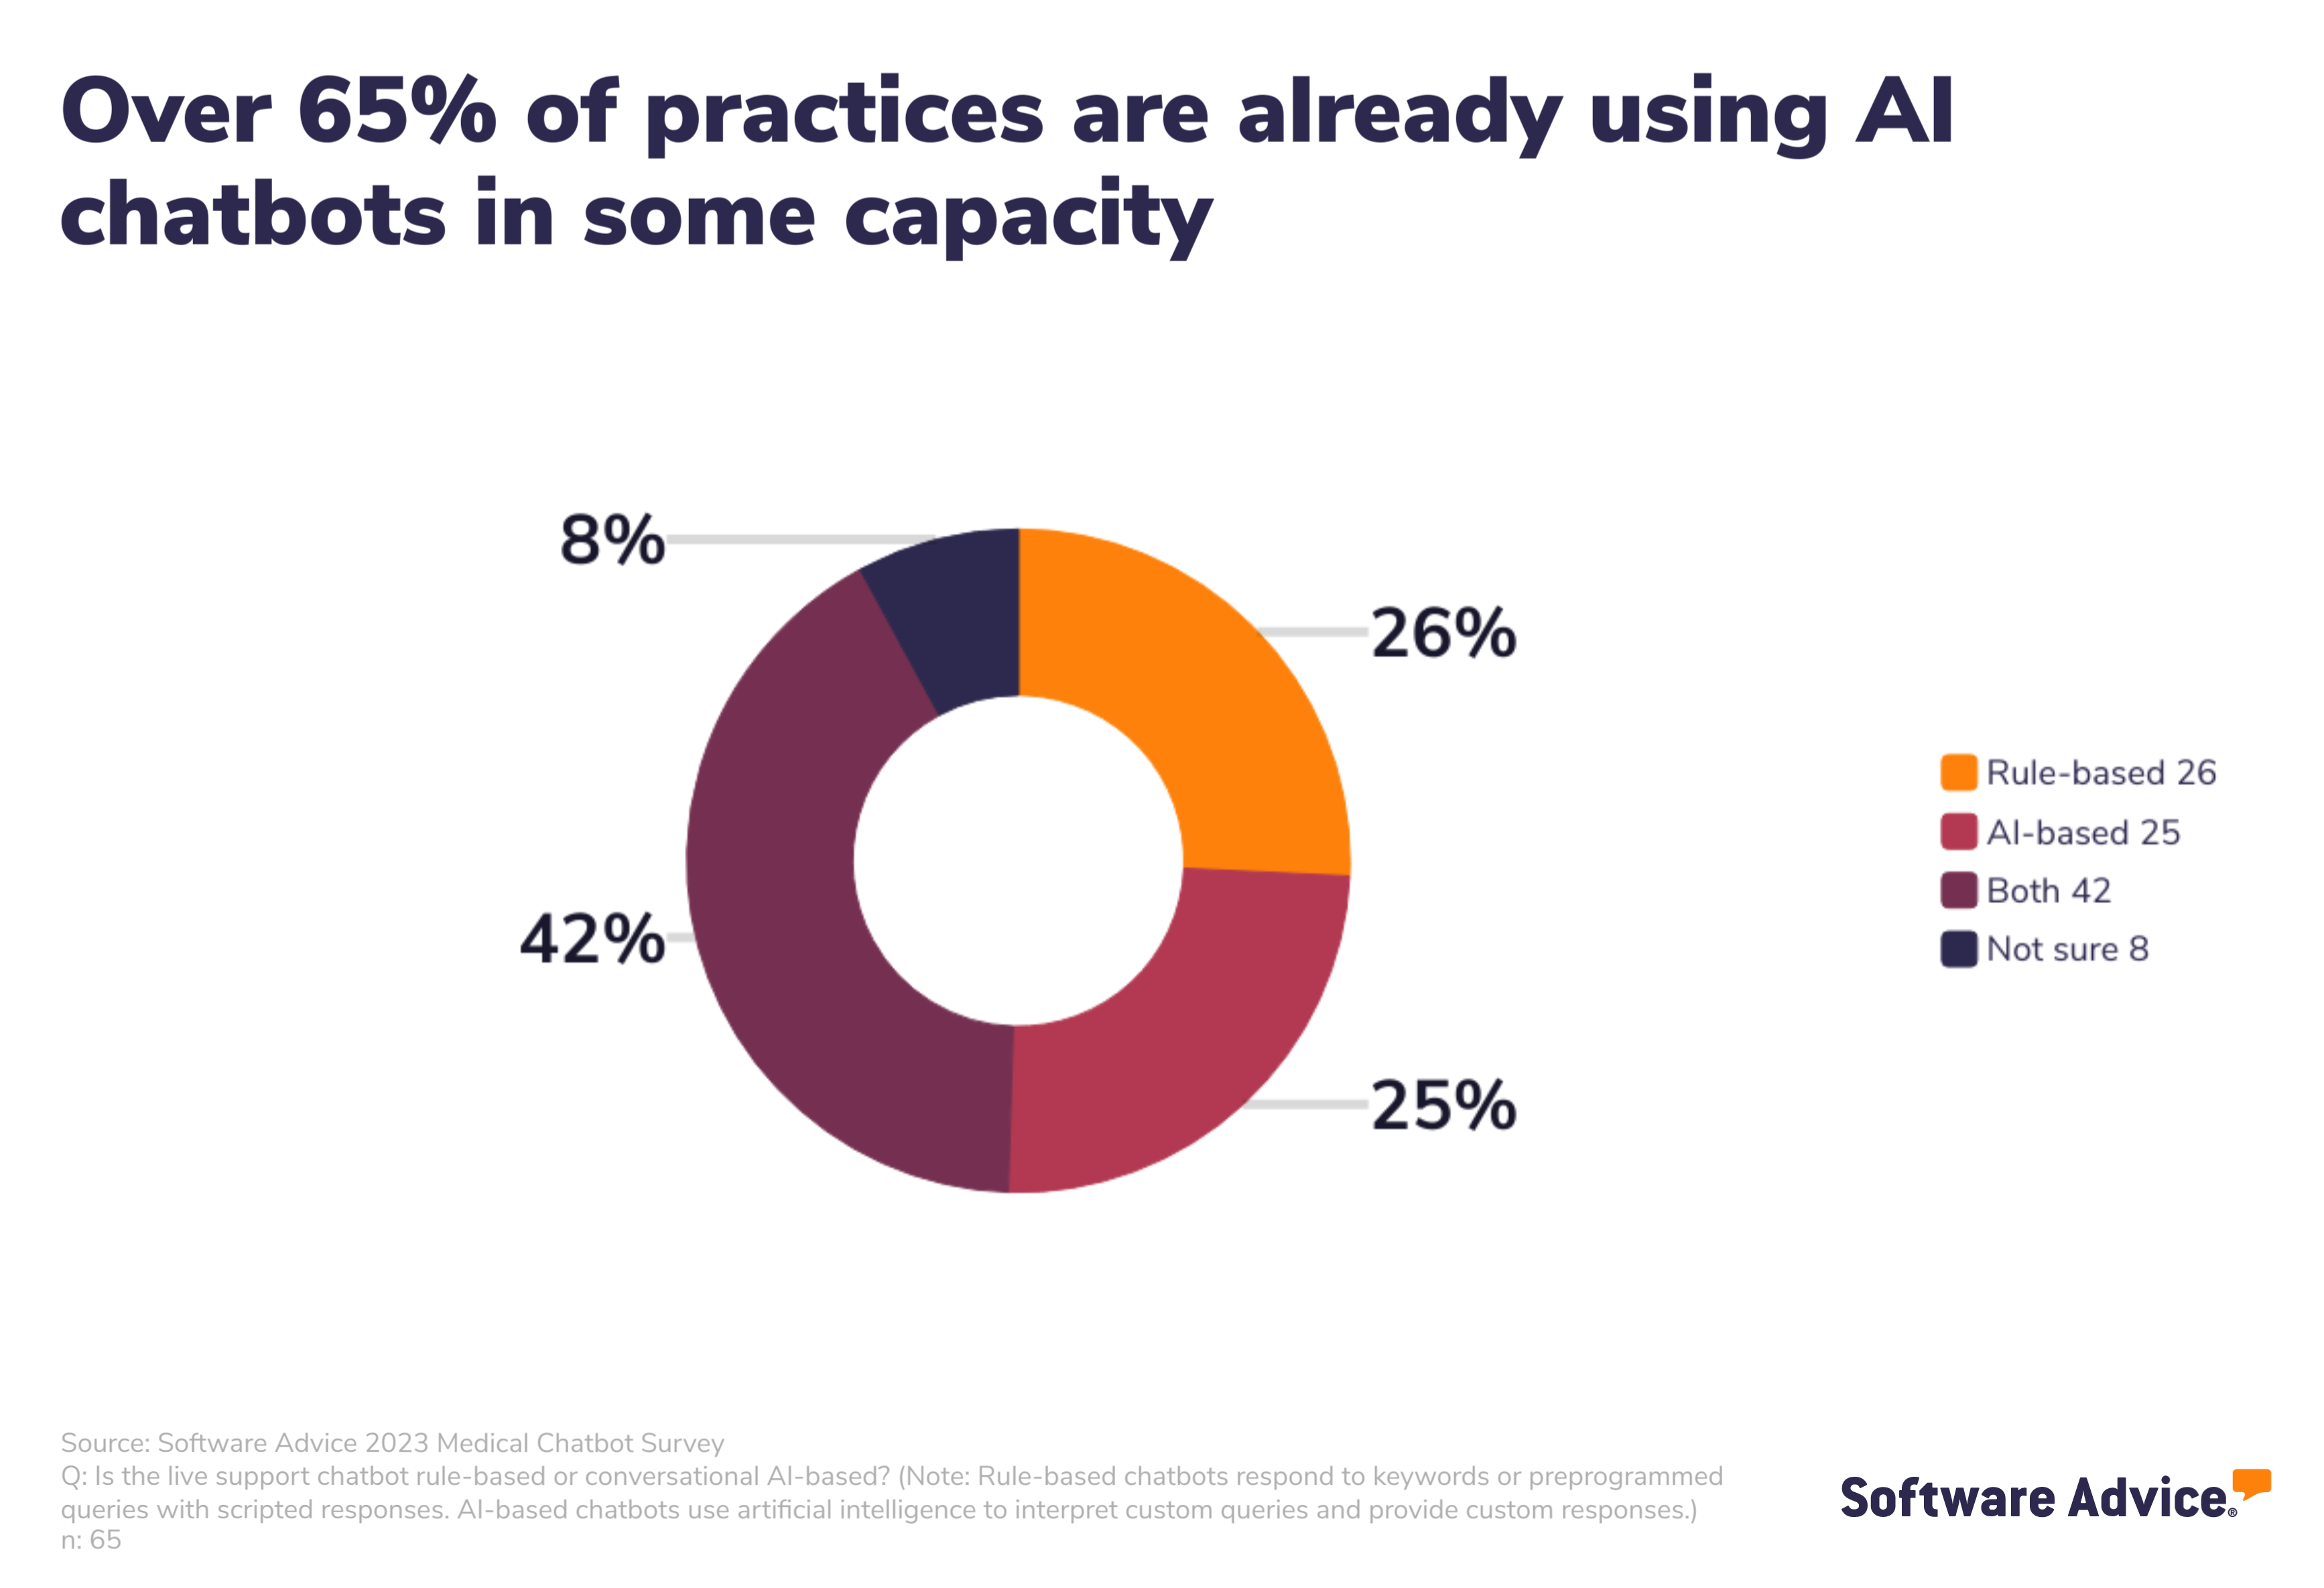 The percentage of practices who use chatbots that are using AI-powered chatbots